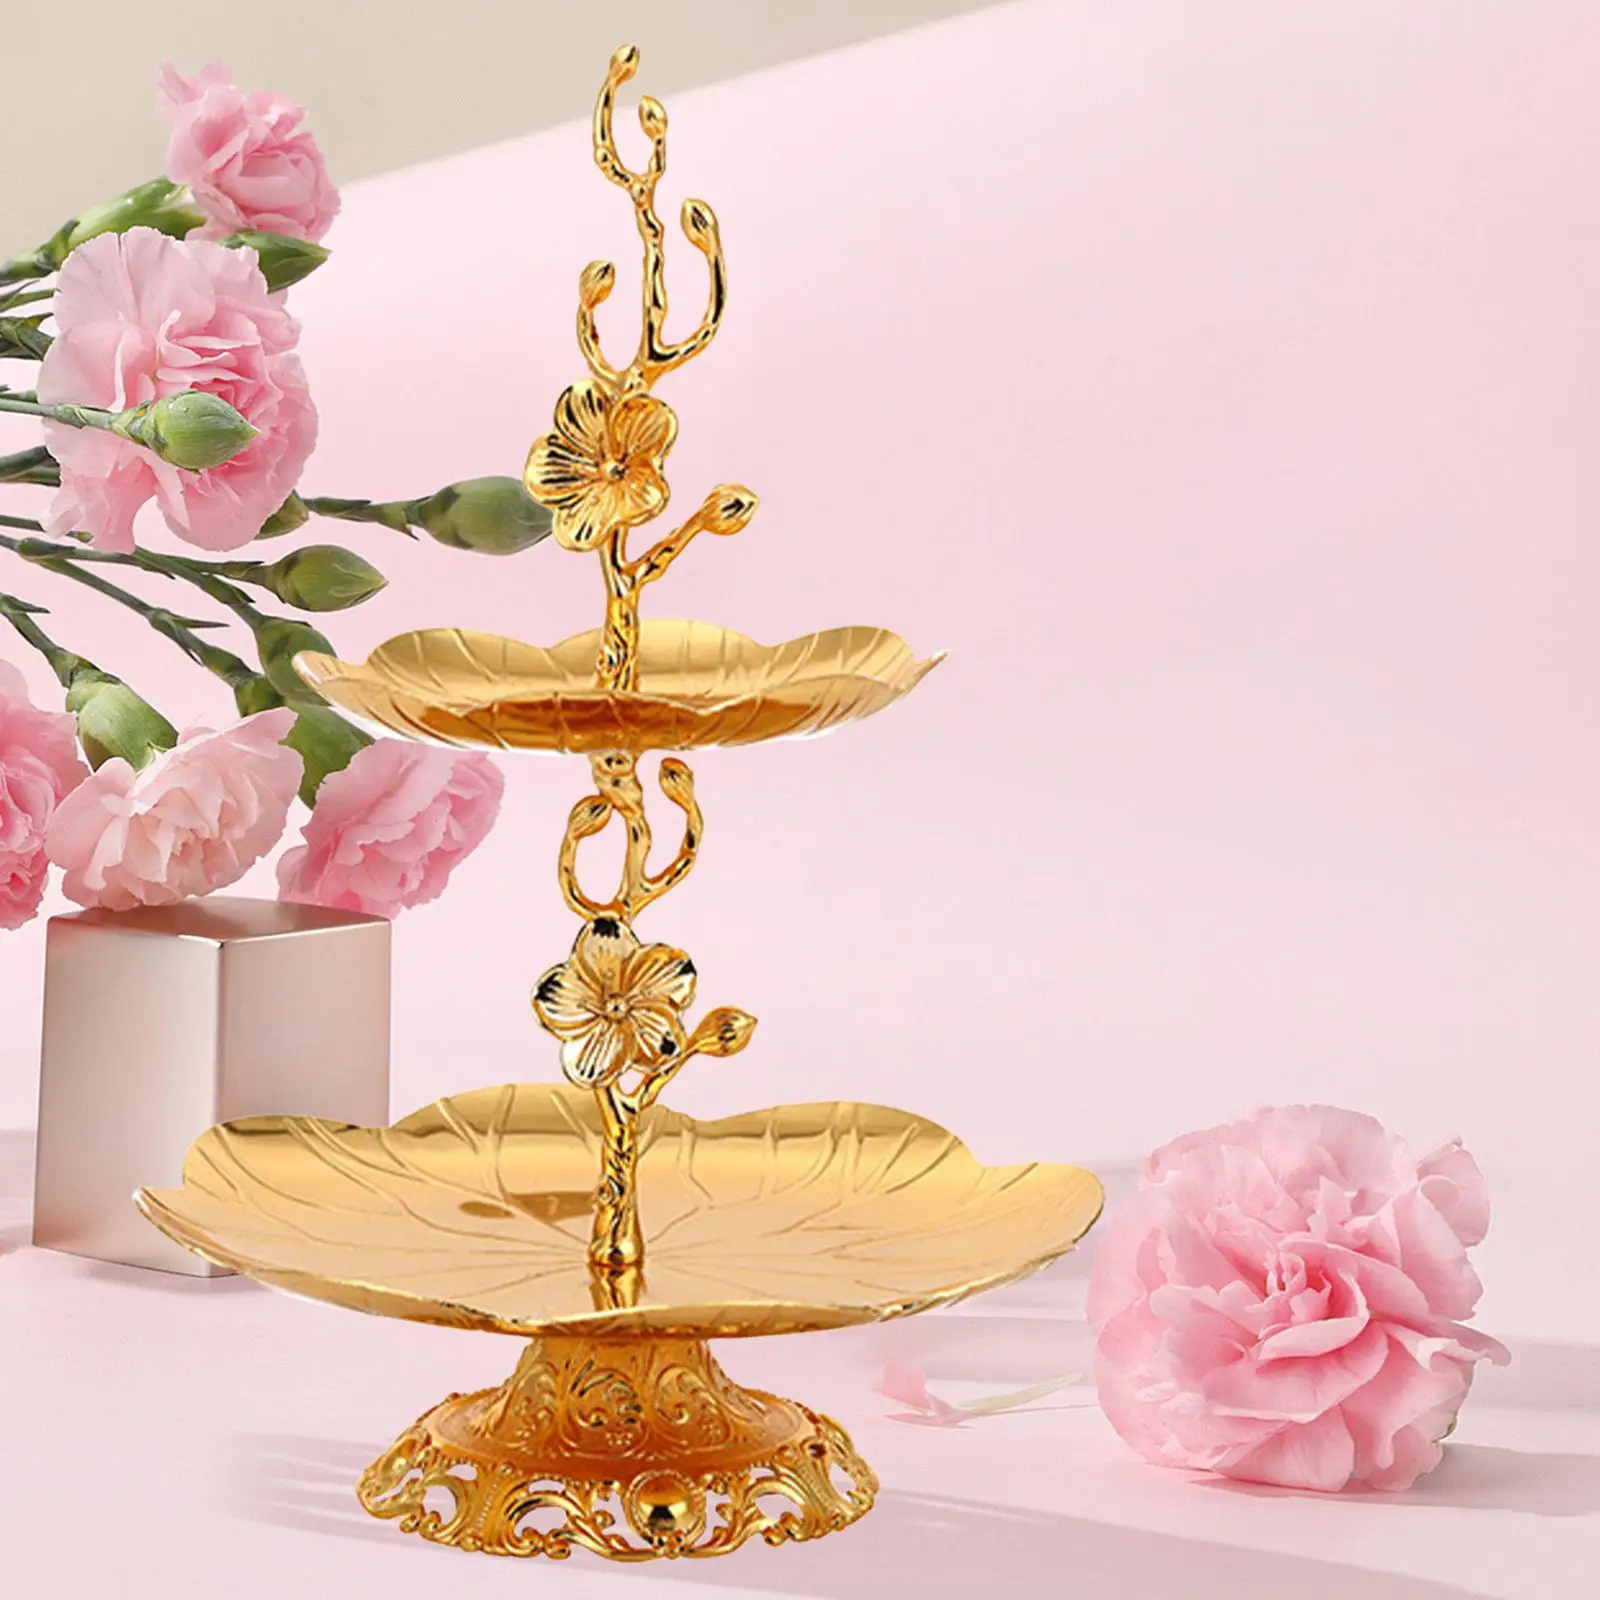 2 Tier Cupcake Stand Figurine Fruit Candy Display Tower Dessert Stand Serving Tray Display Holder for Tea Party Supplies Wedding